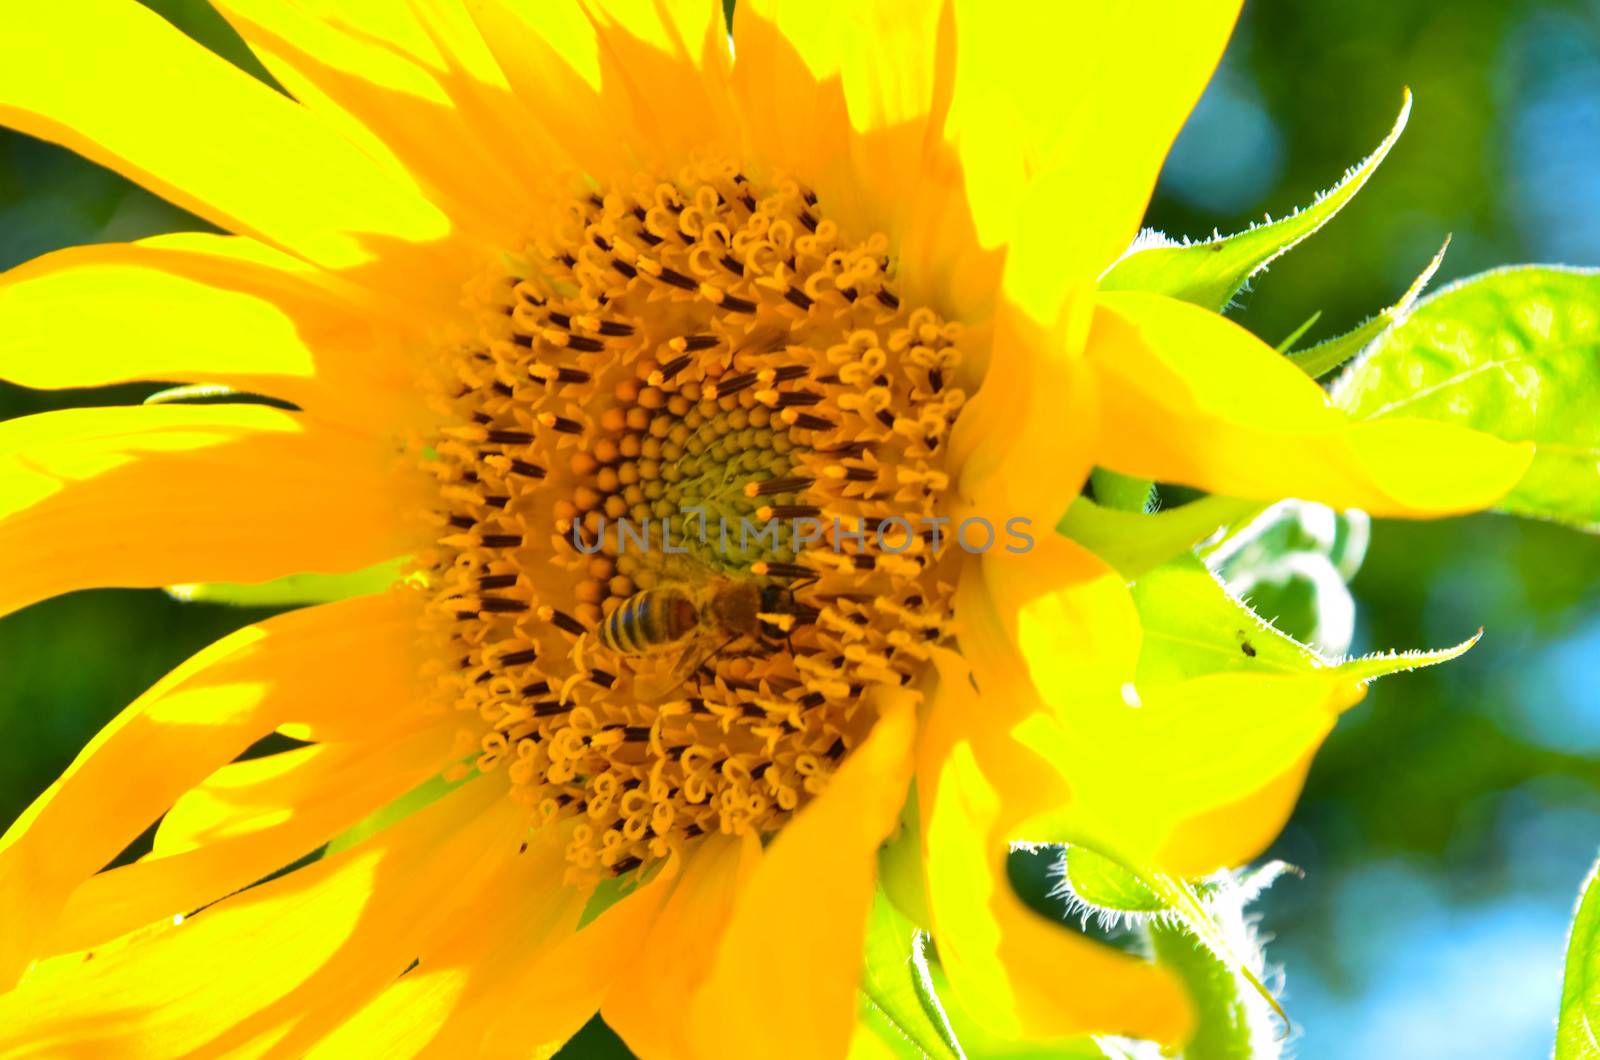 Sunflower's Details and within pollen patterns  colors are very beautiful. by kimbo-bo